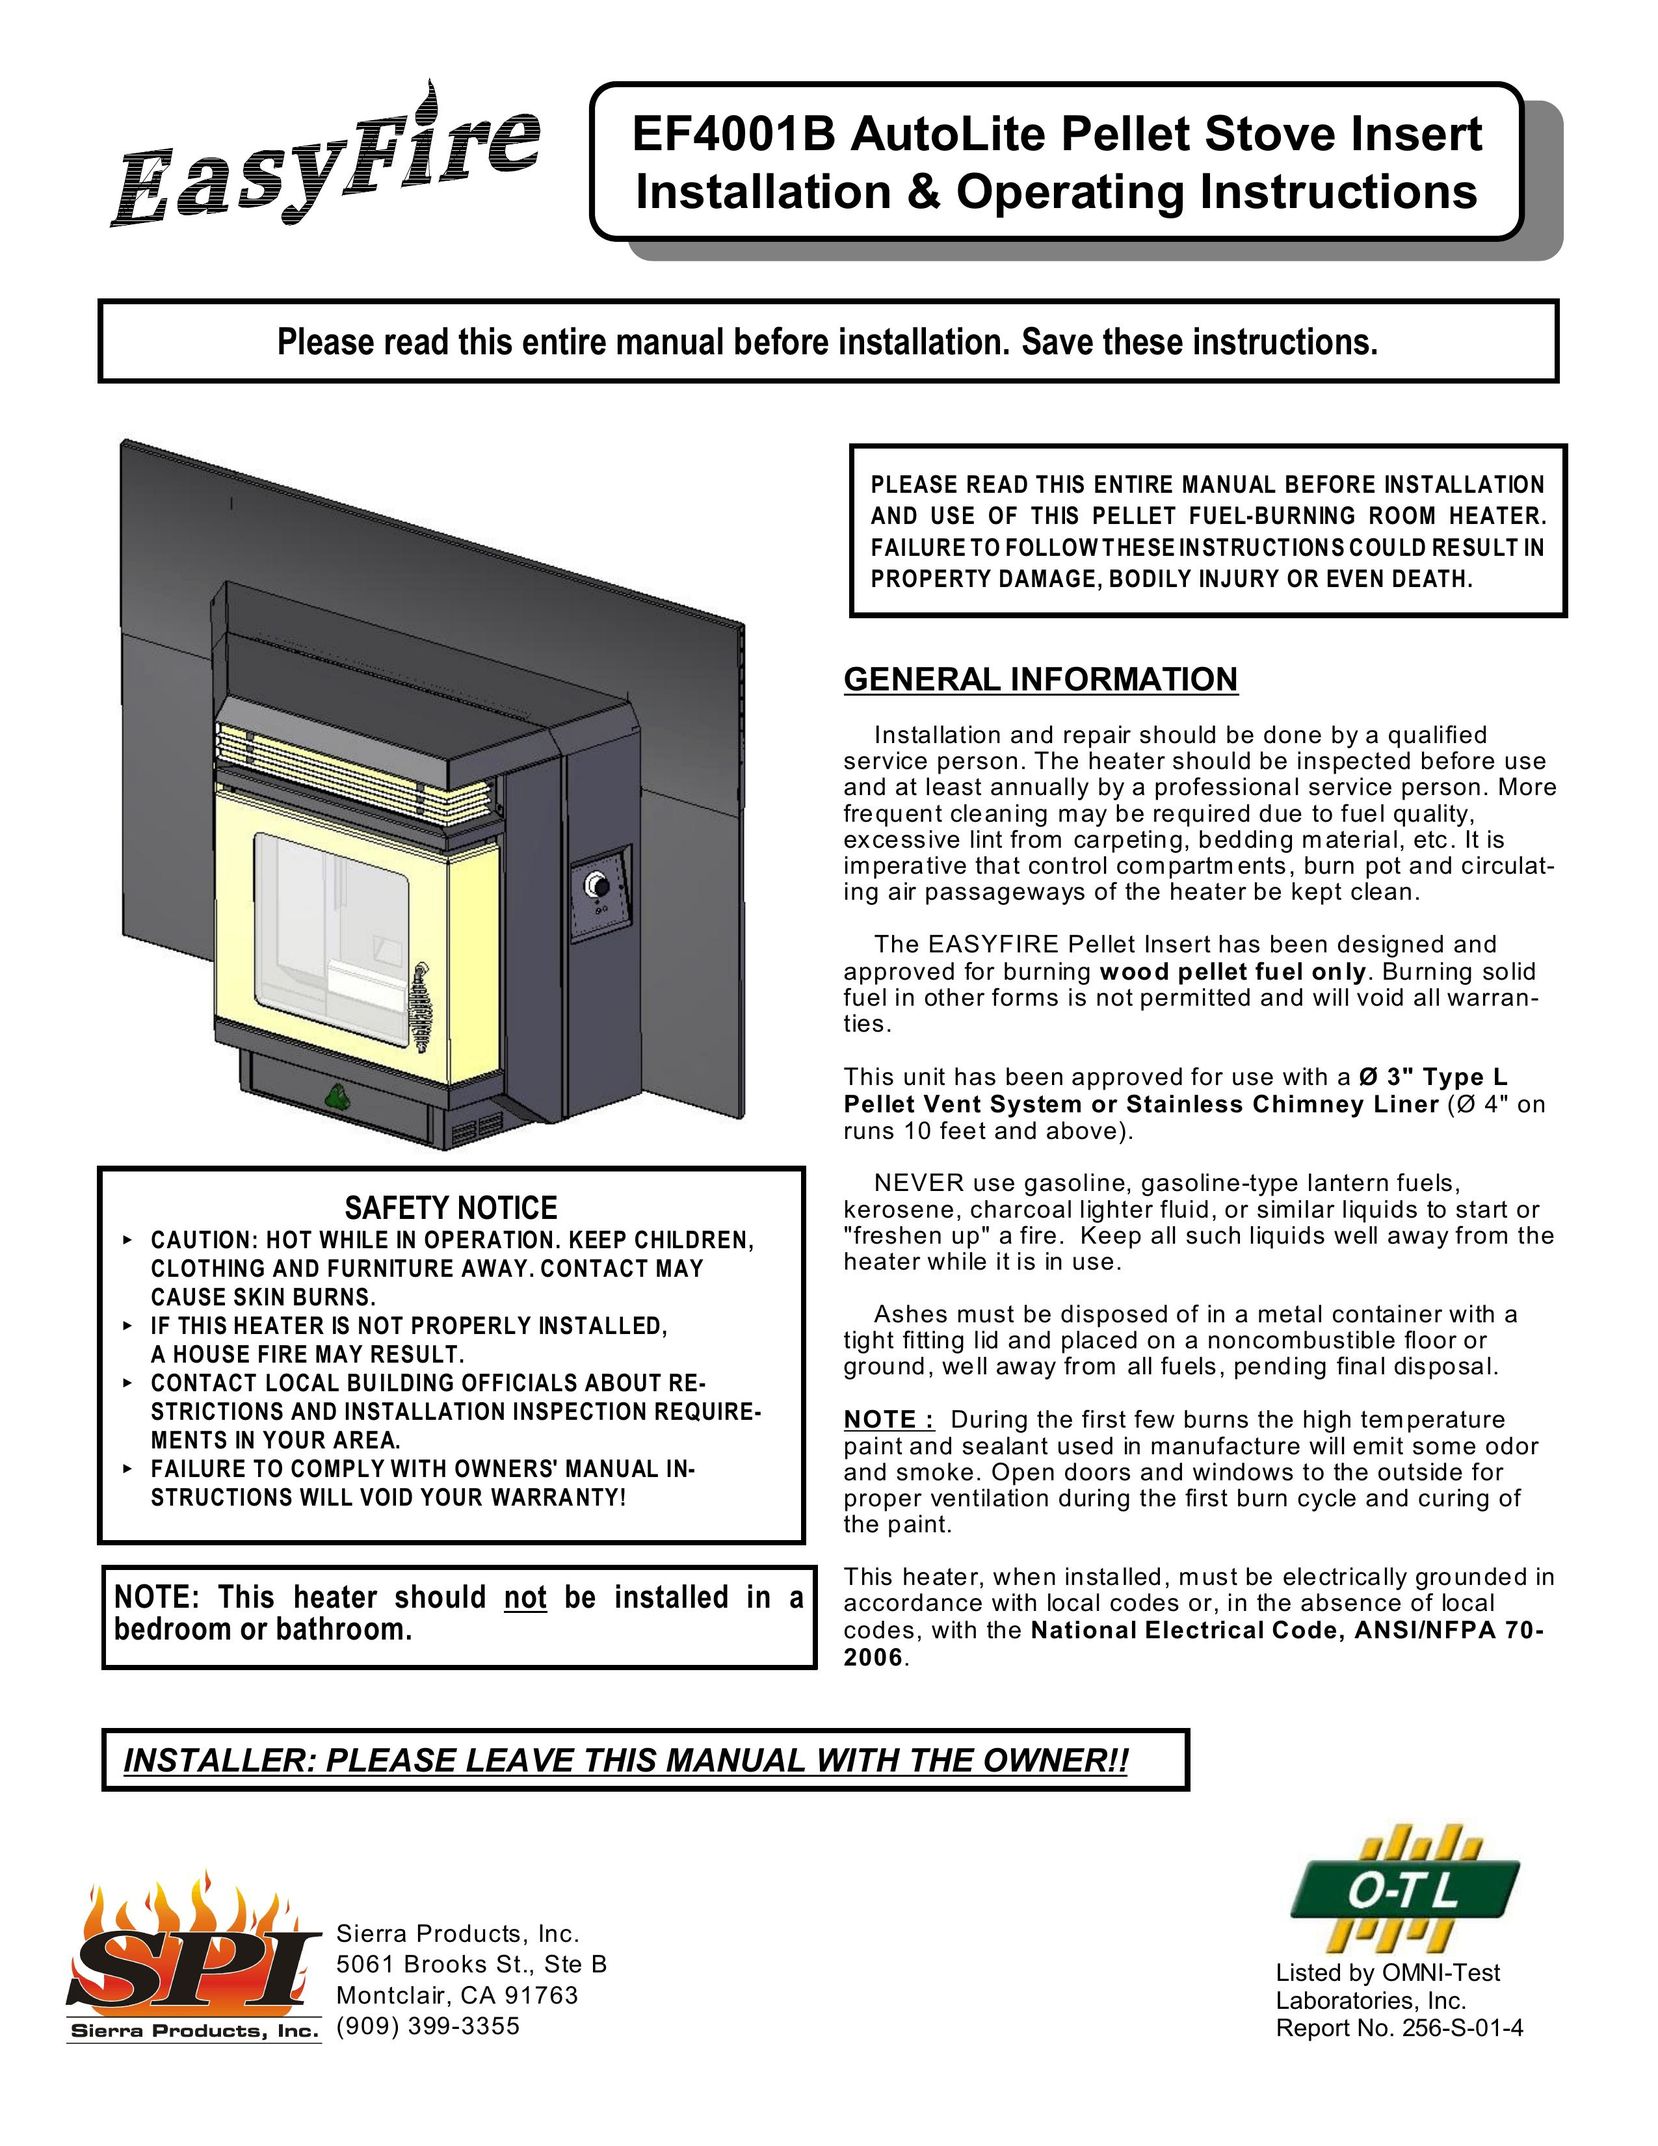 Sierra Products EF-4001B Stove User Manual